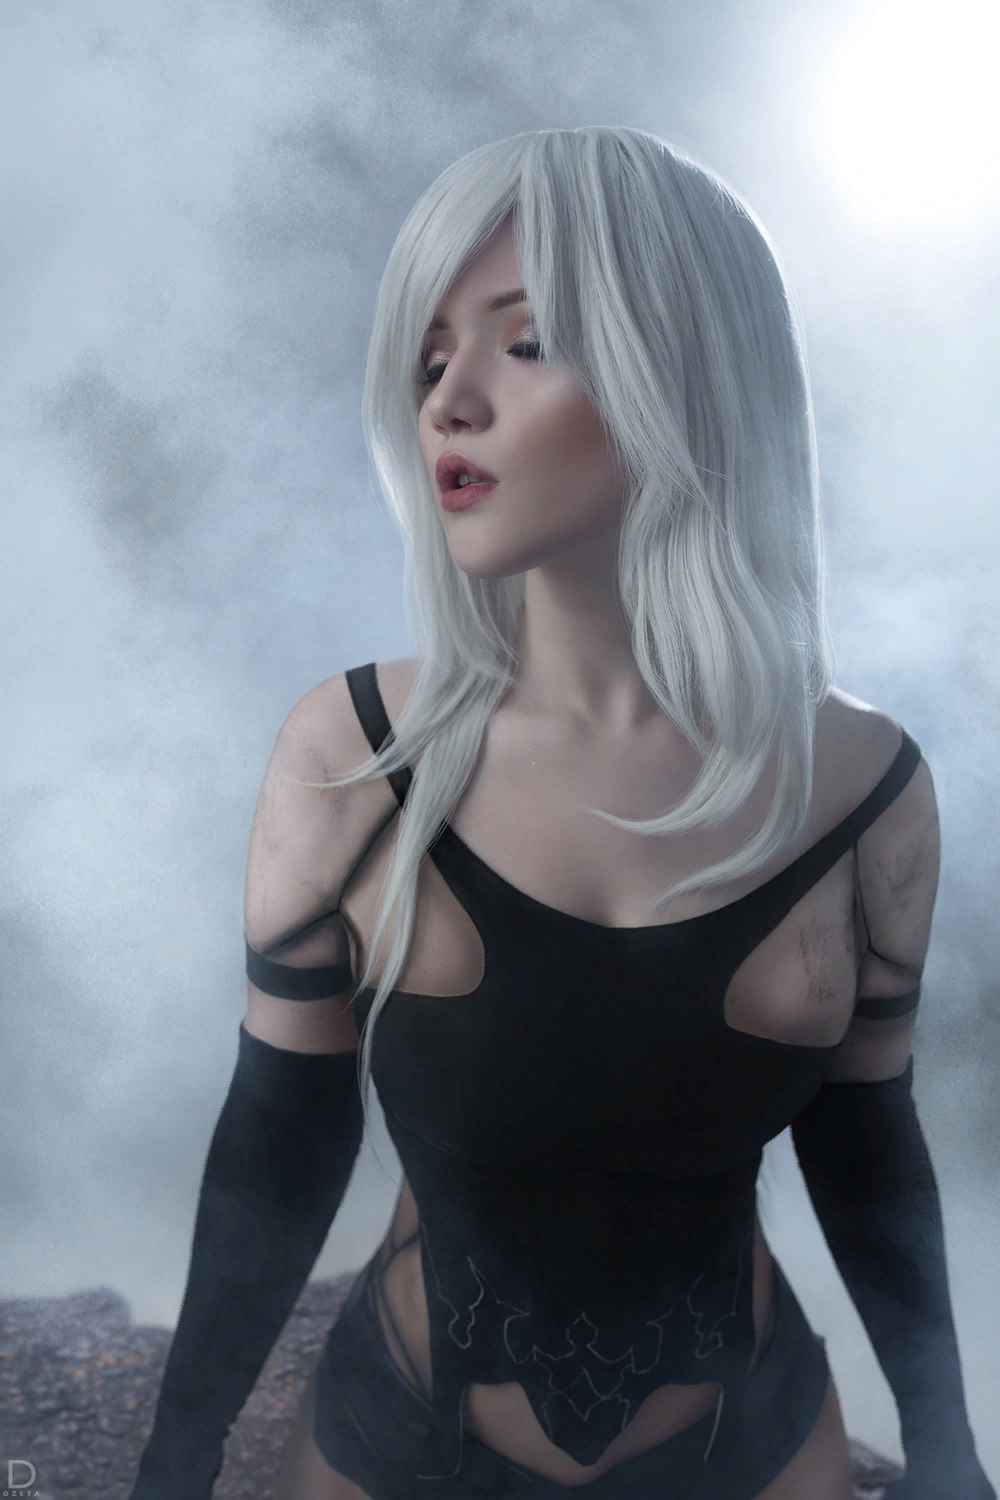 The model reincarnated as a sexy android - Cosplay, NIER Automata, Games, Longpost, Lada Lumos